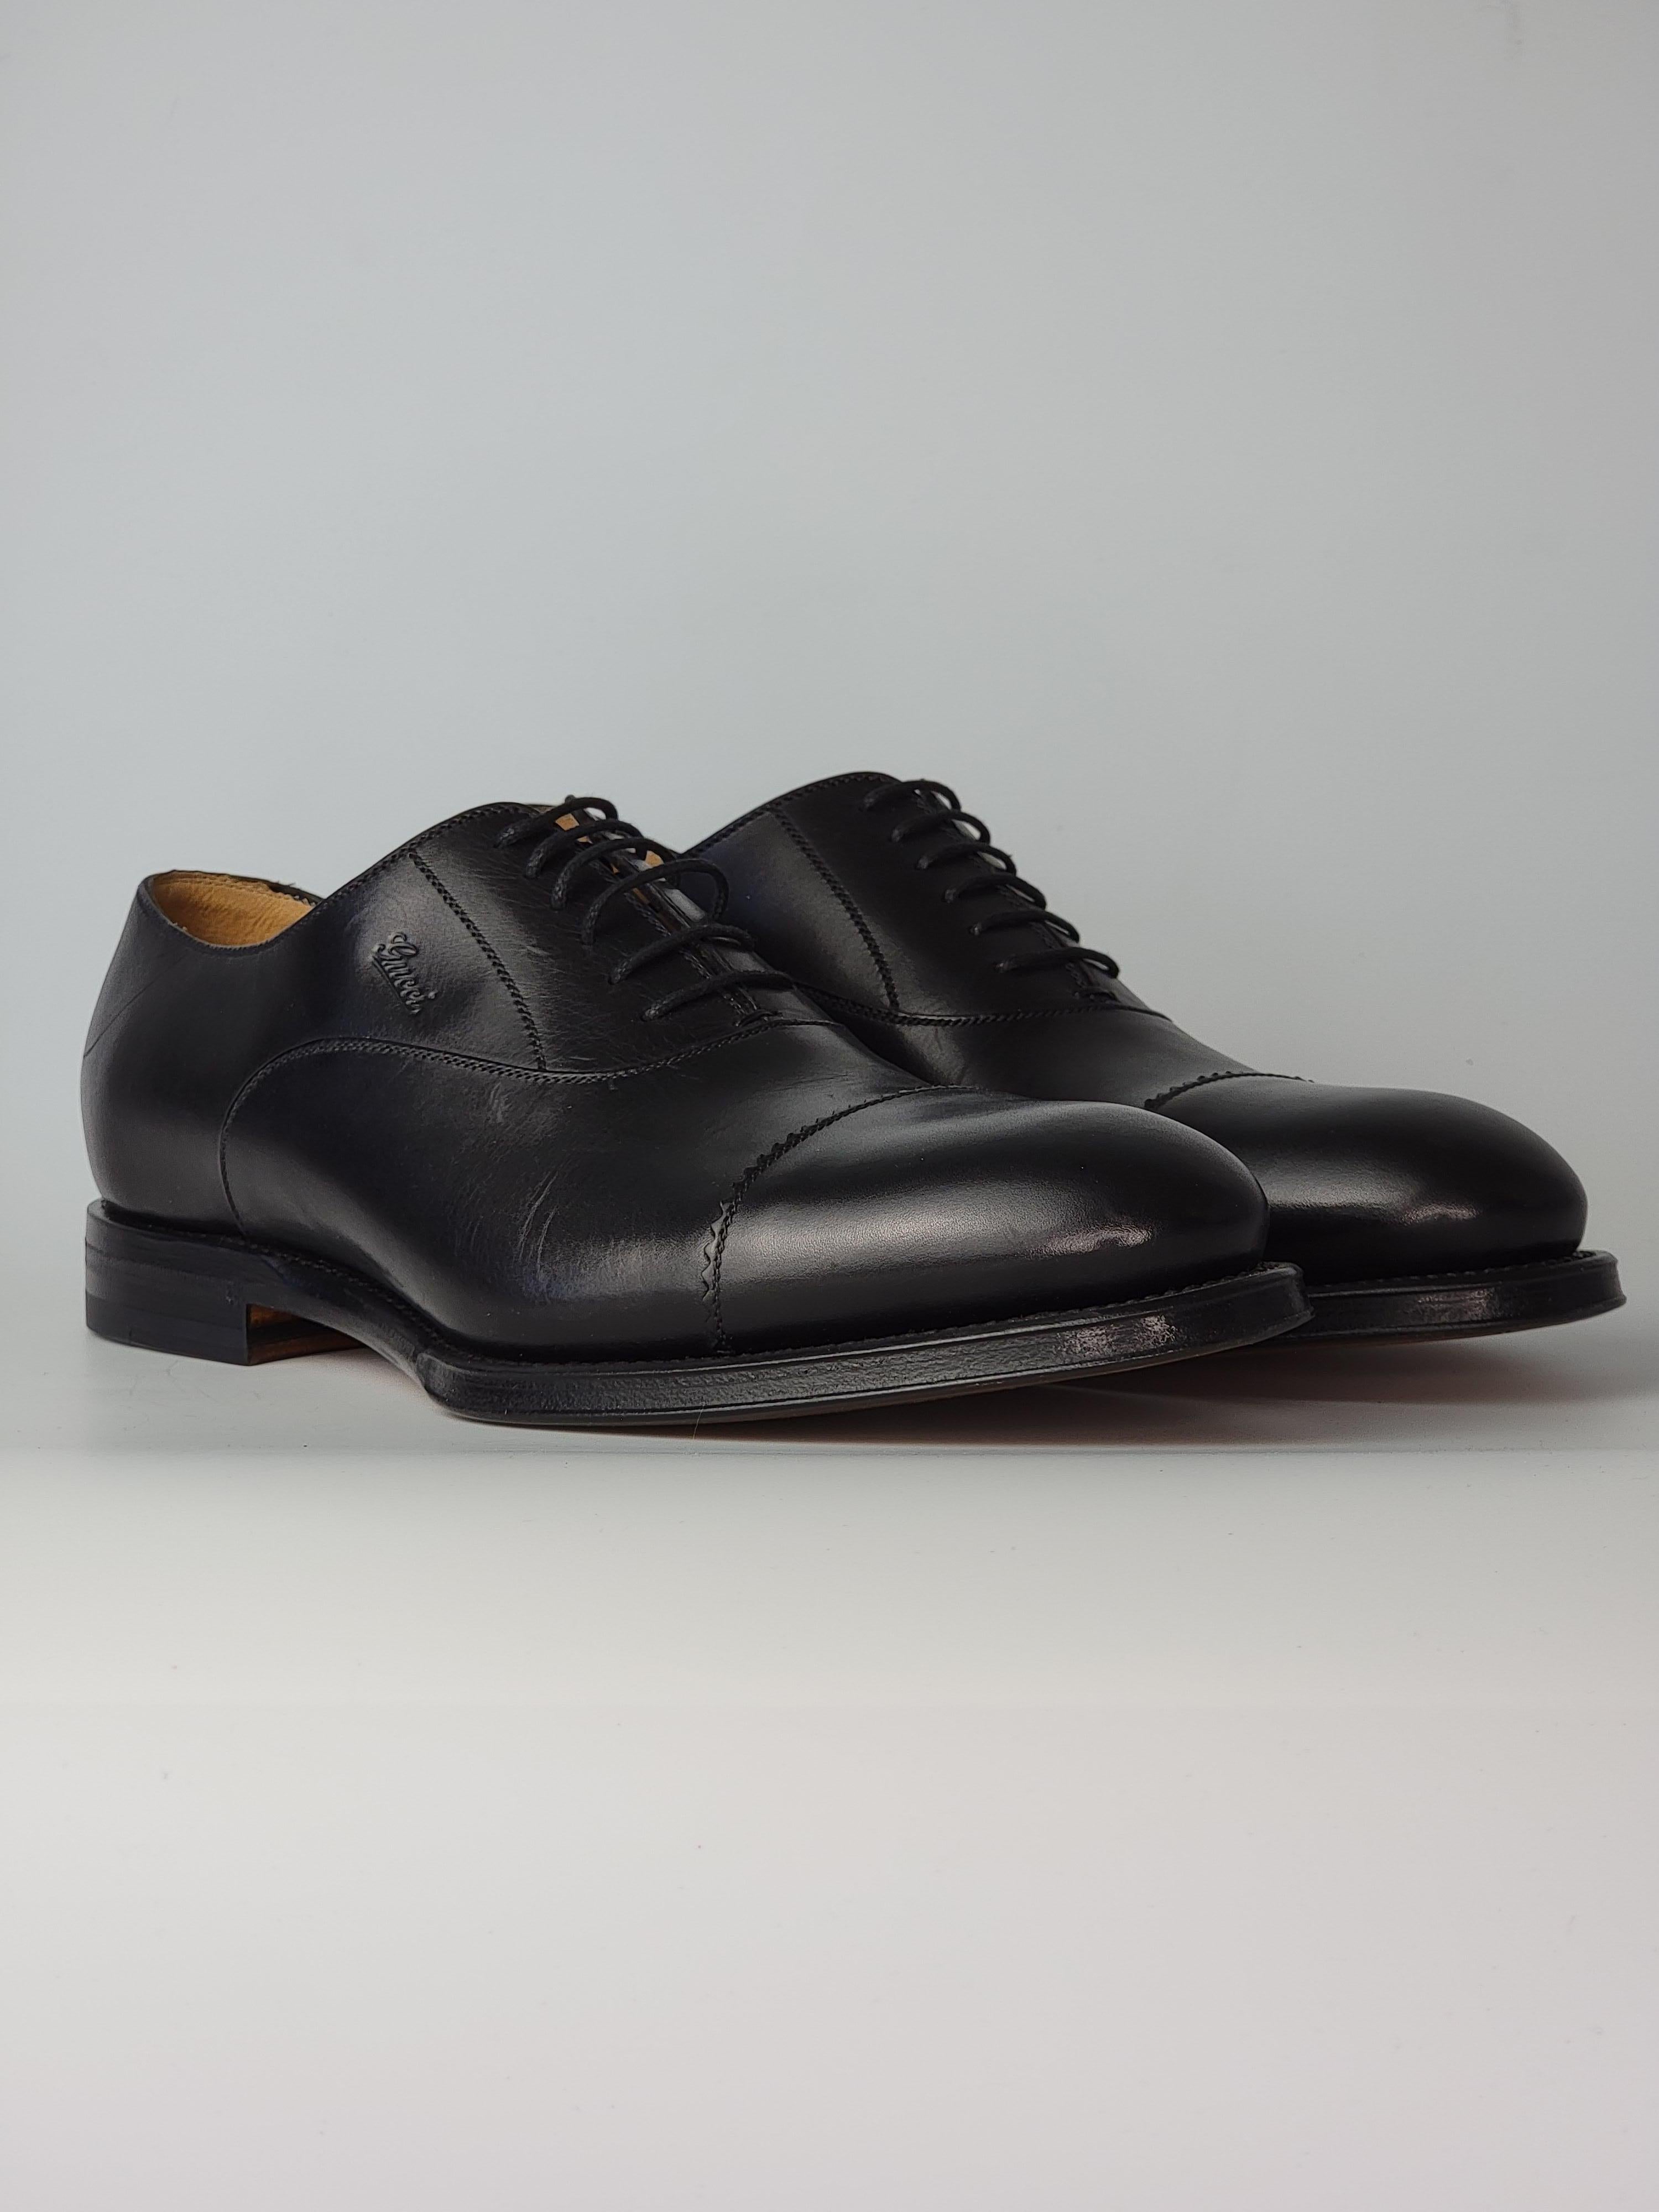 A classic Gucci shoe. With a sleek design, these black shoes are crafted in Italy from soft calf leather and feature an almond toe, a branded insole, and a leather sole. This item is the floor model.
